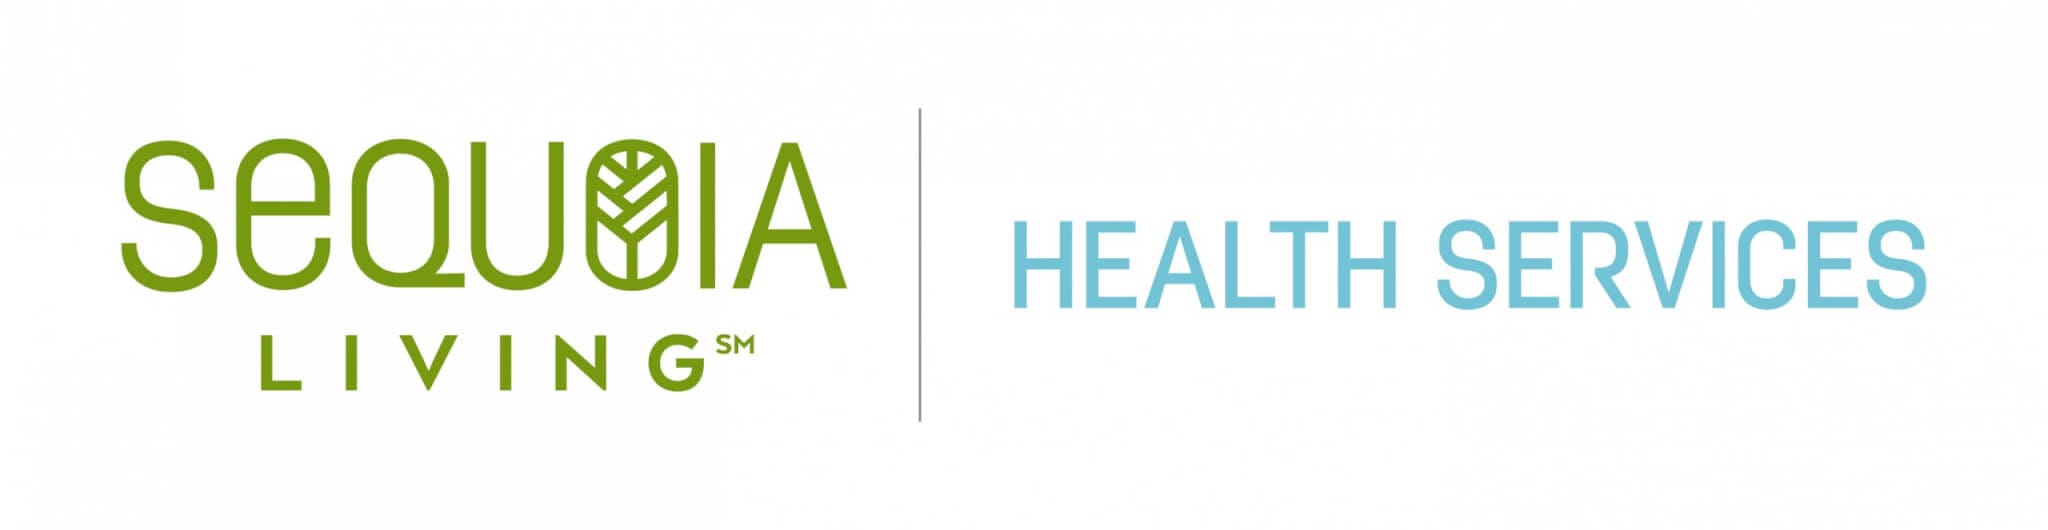 Sequoia Living. Health services